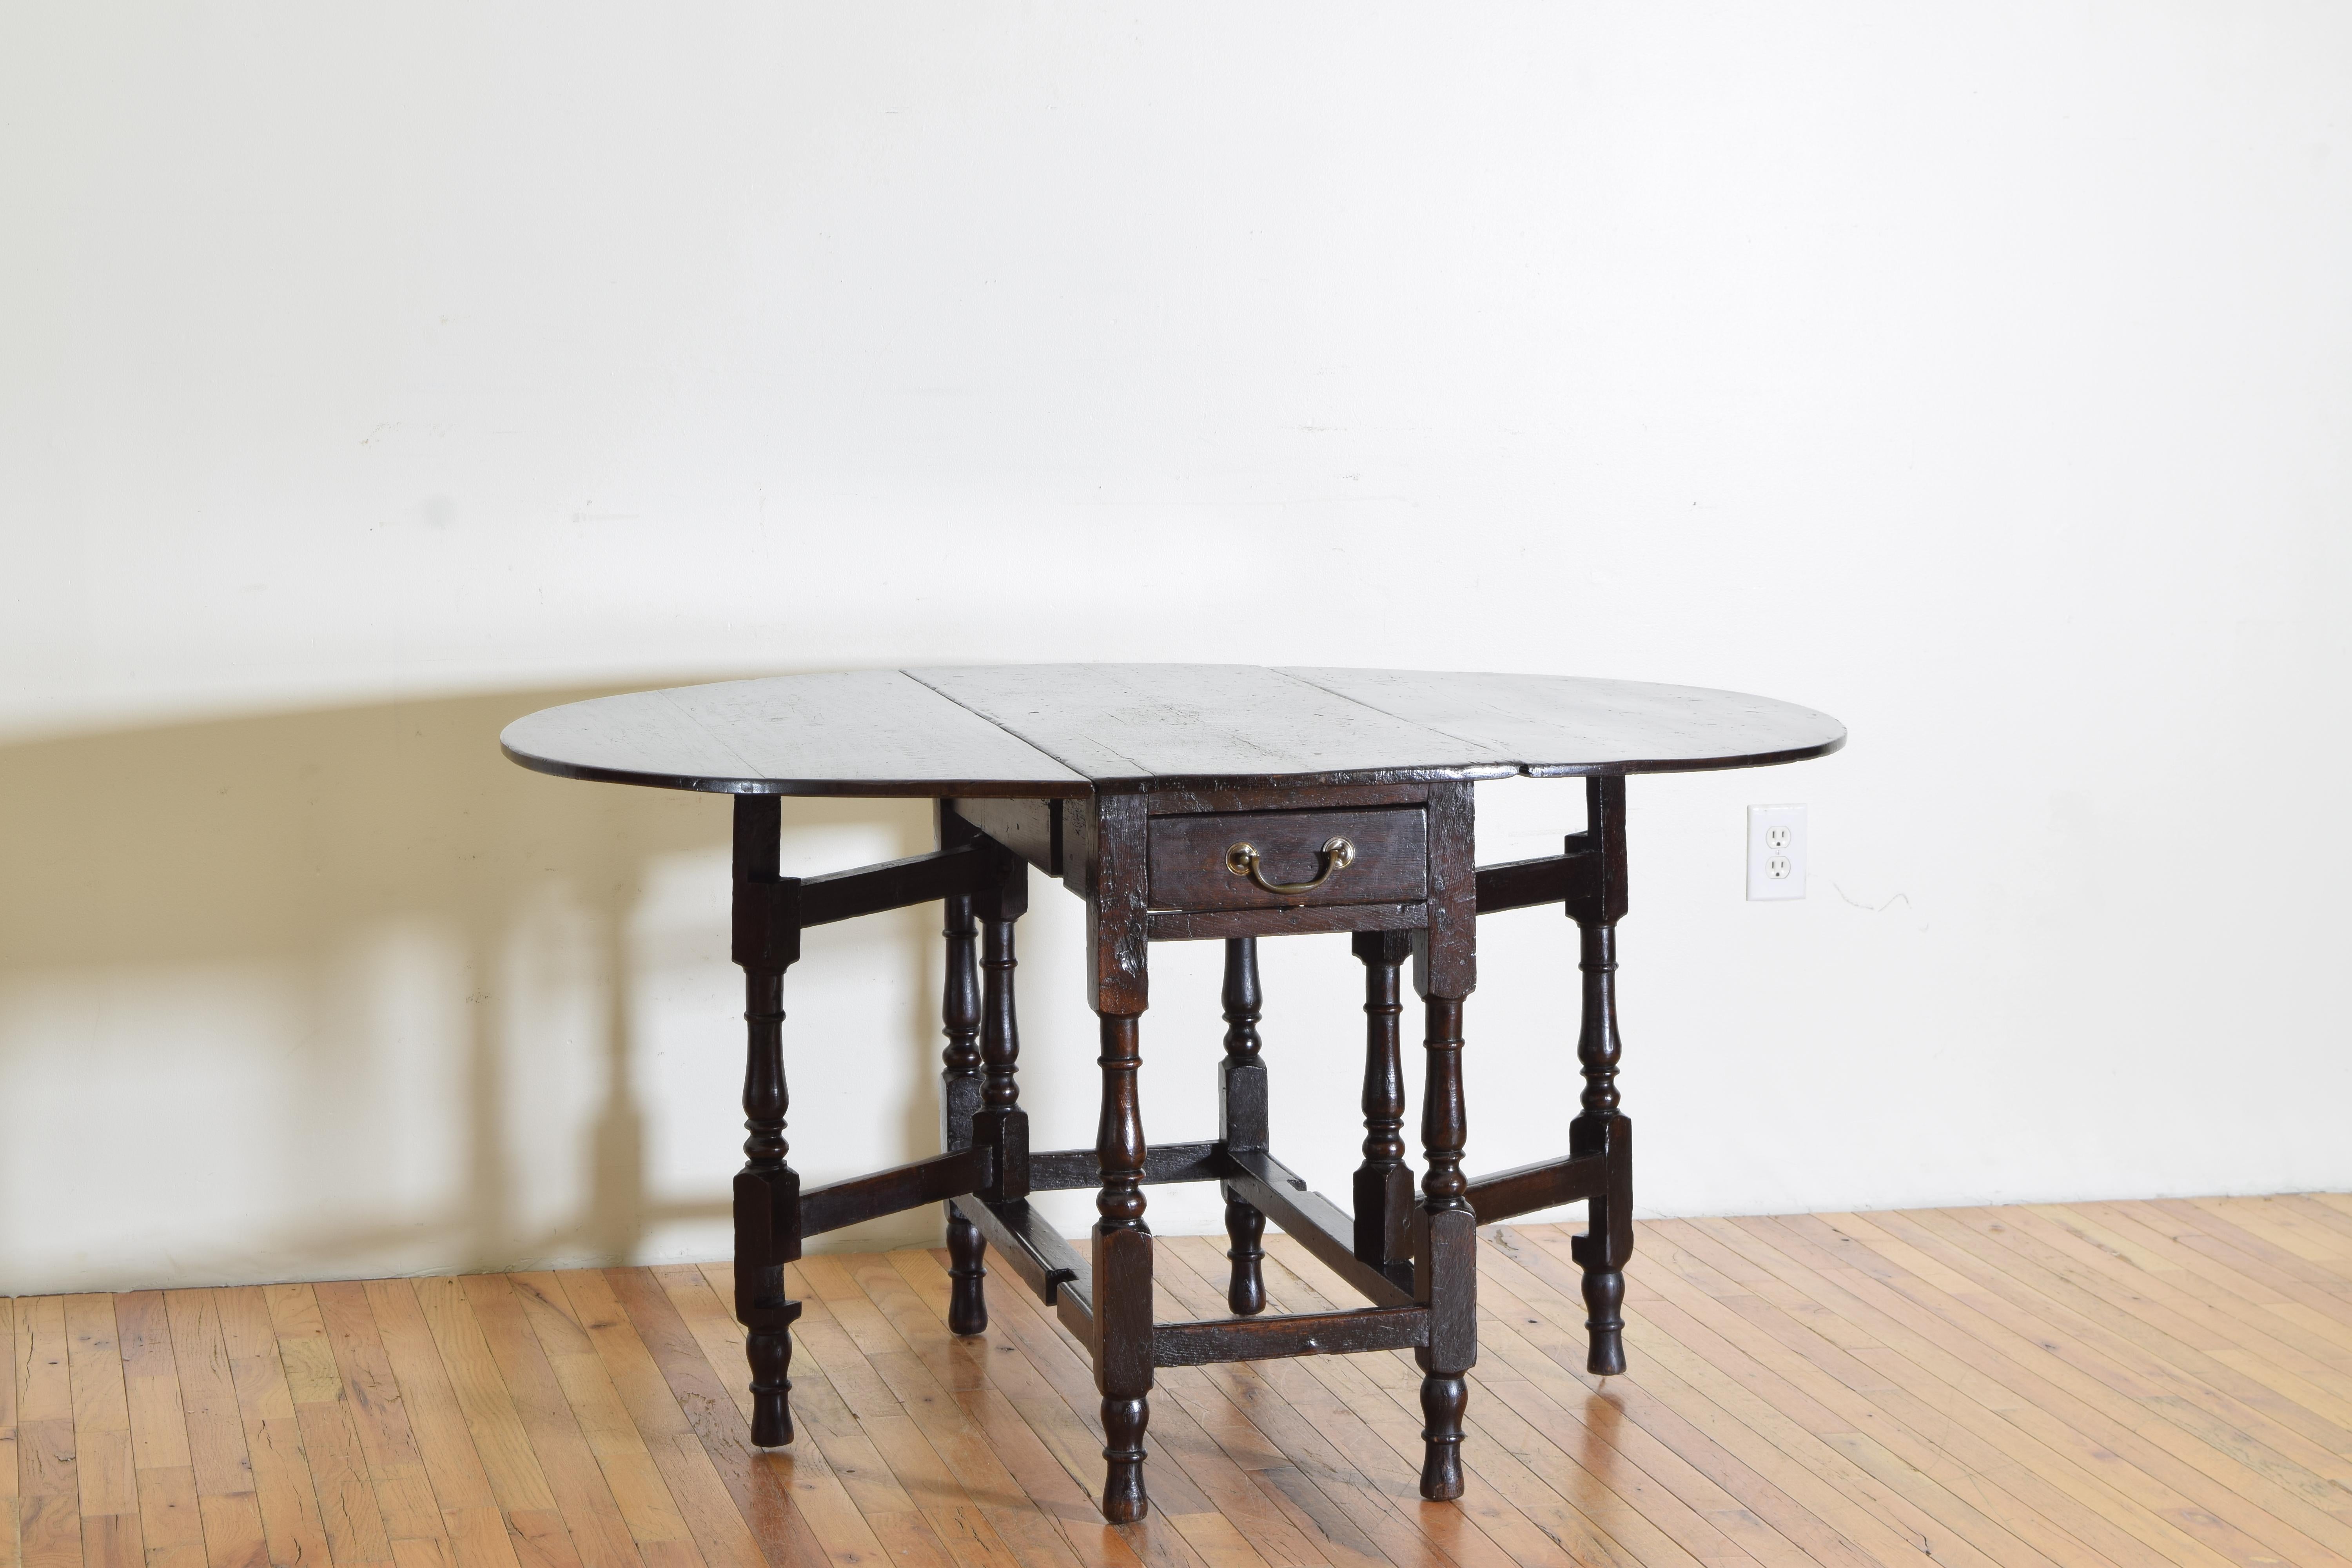 Having, when fully opened, a top between oval and round resting on a metamorphic base featuring bobbin turned legs with block stretchers, the side legs hinged to allow support for the folding top, containing two deep drawers with original brass